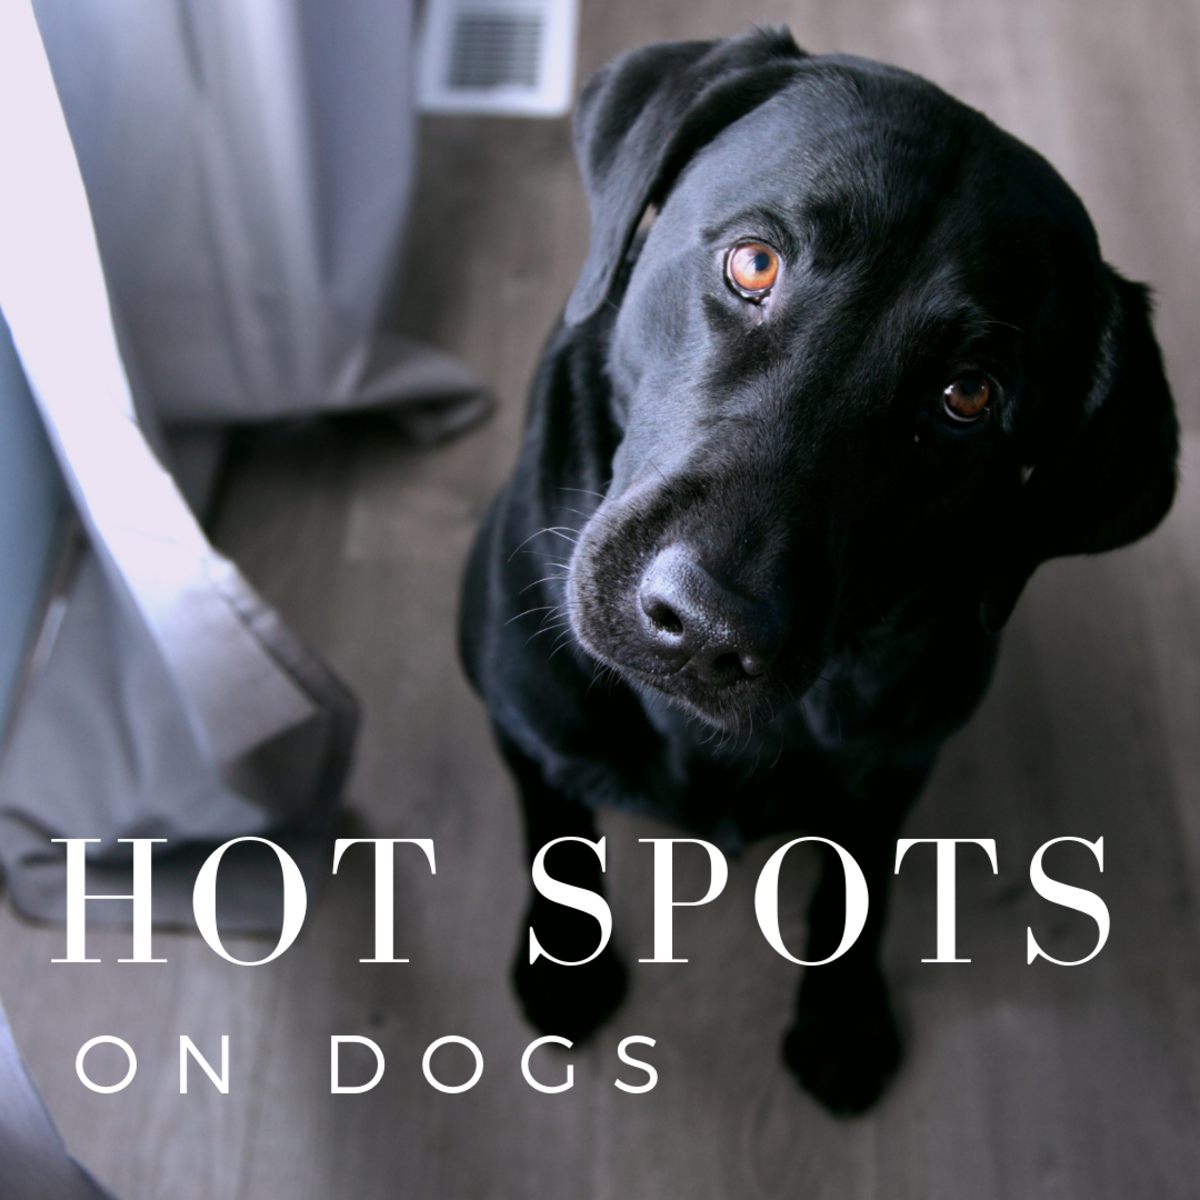 What Causes Hot Spots on Dogs?